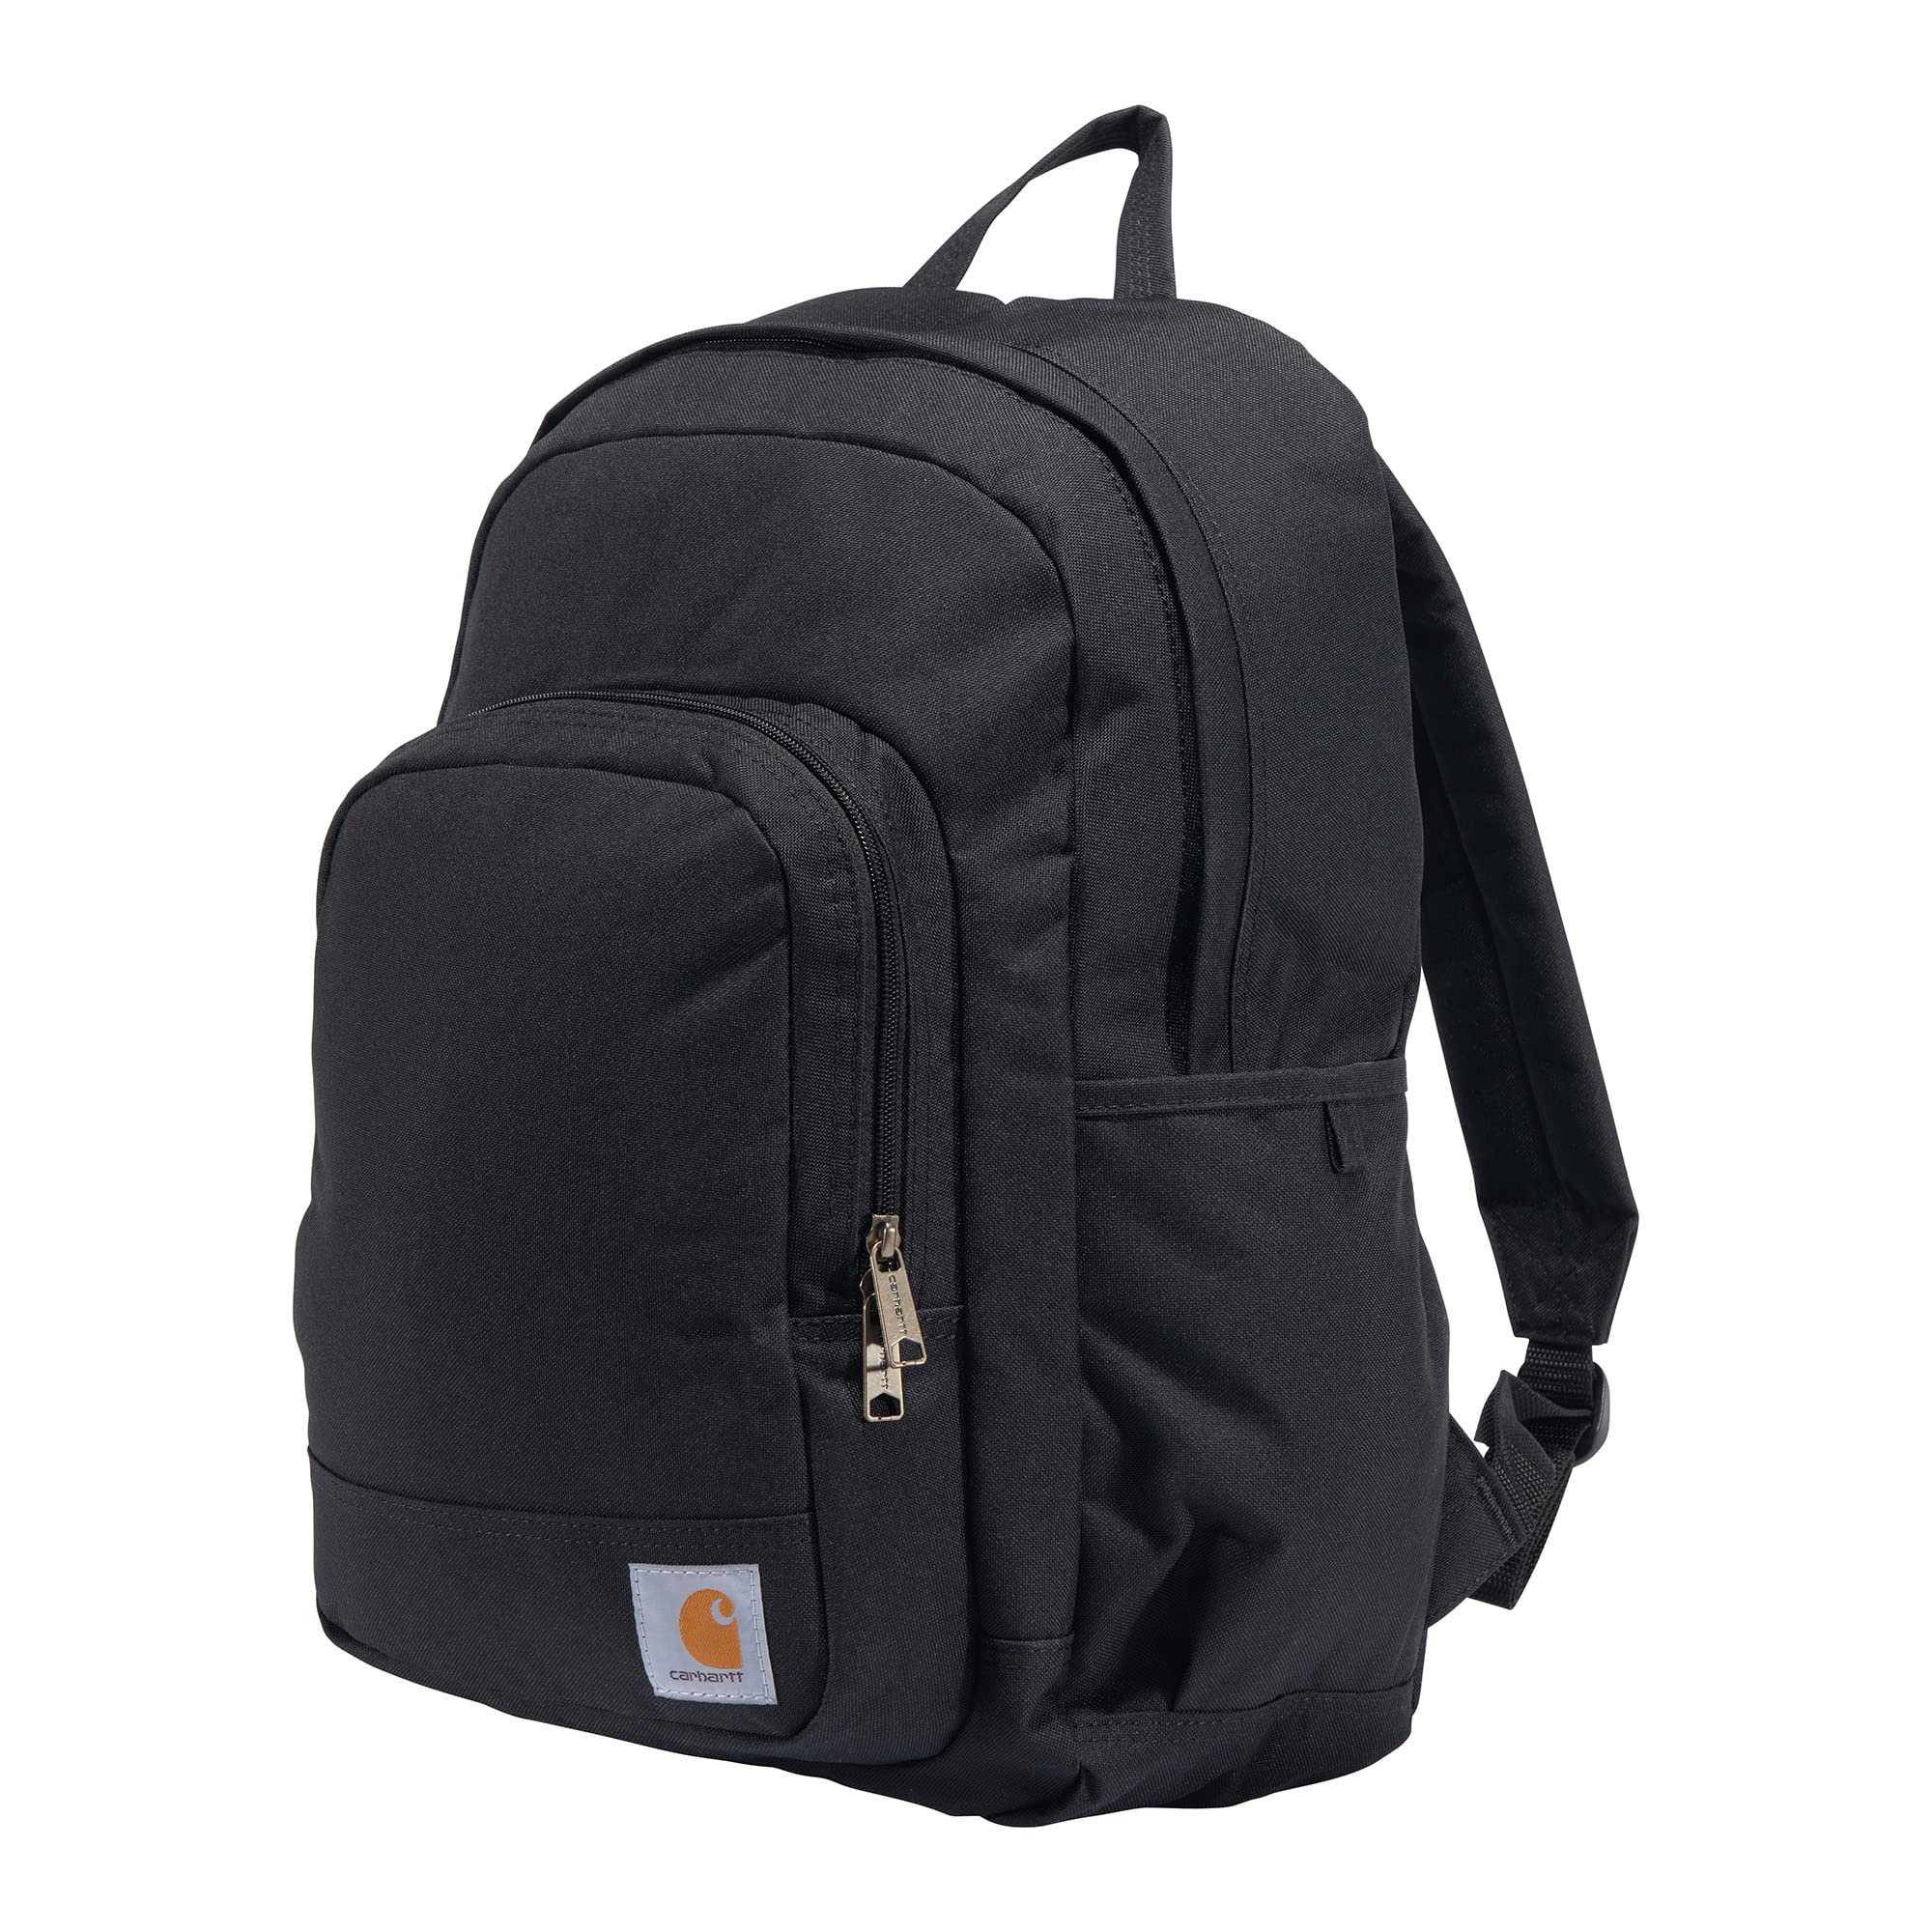 Carhartt Essentials Backpack with 17-Inch Laptop Sleeve for Travel, Work and School, Black